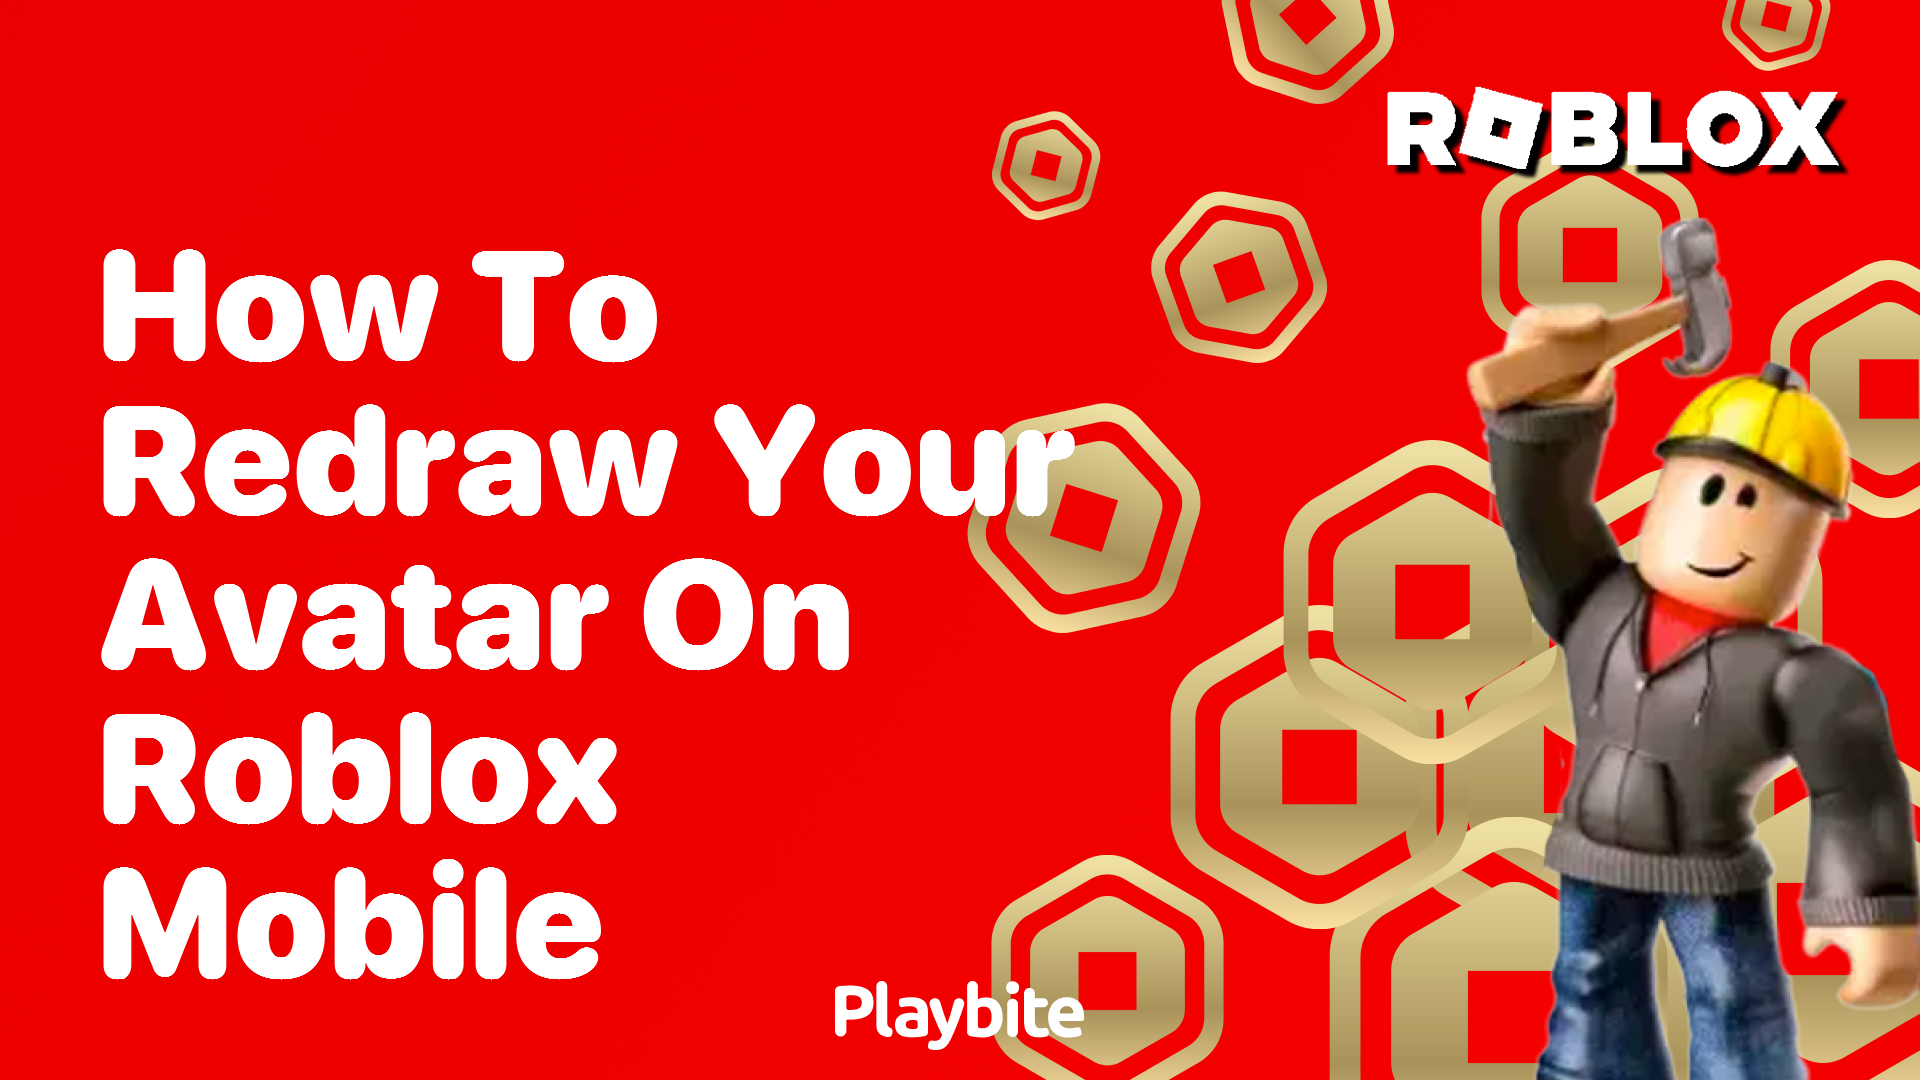 How to Redraw Your Avatar on Roblox Mobile